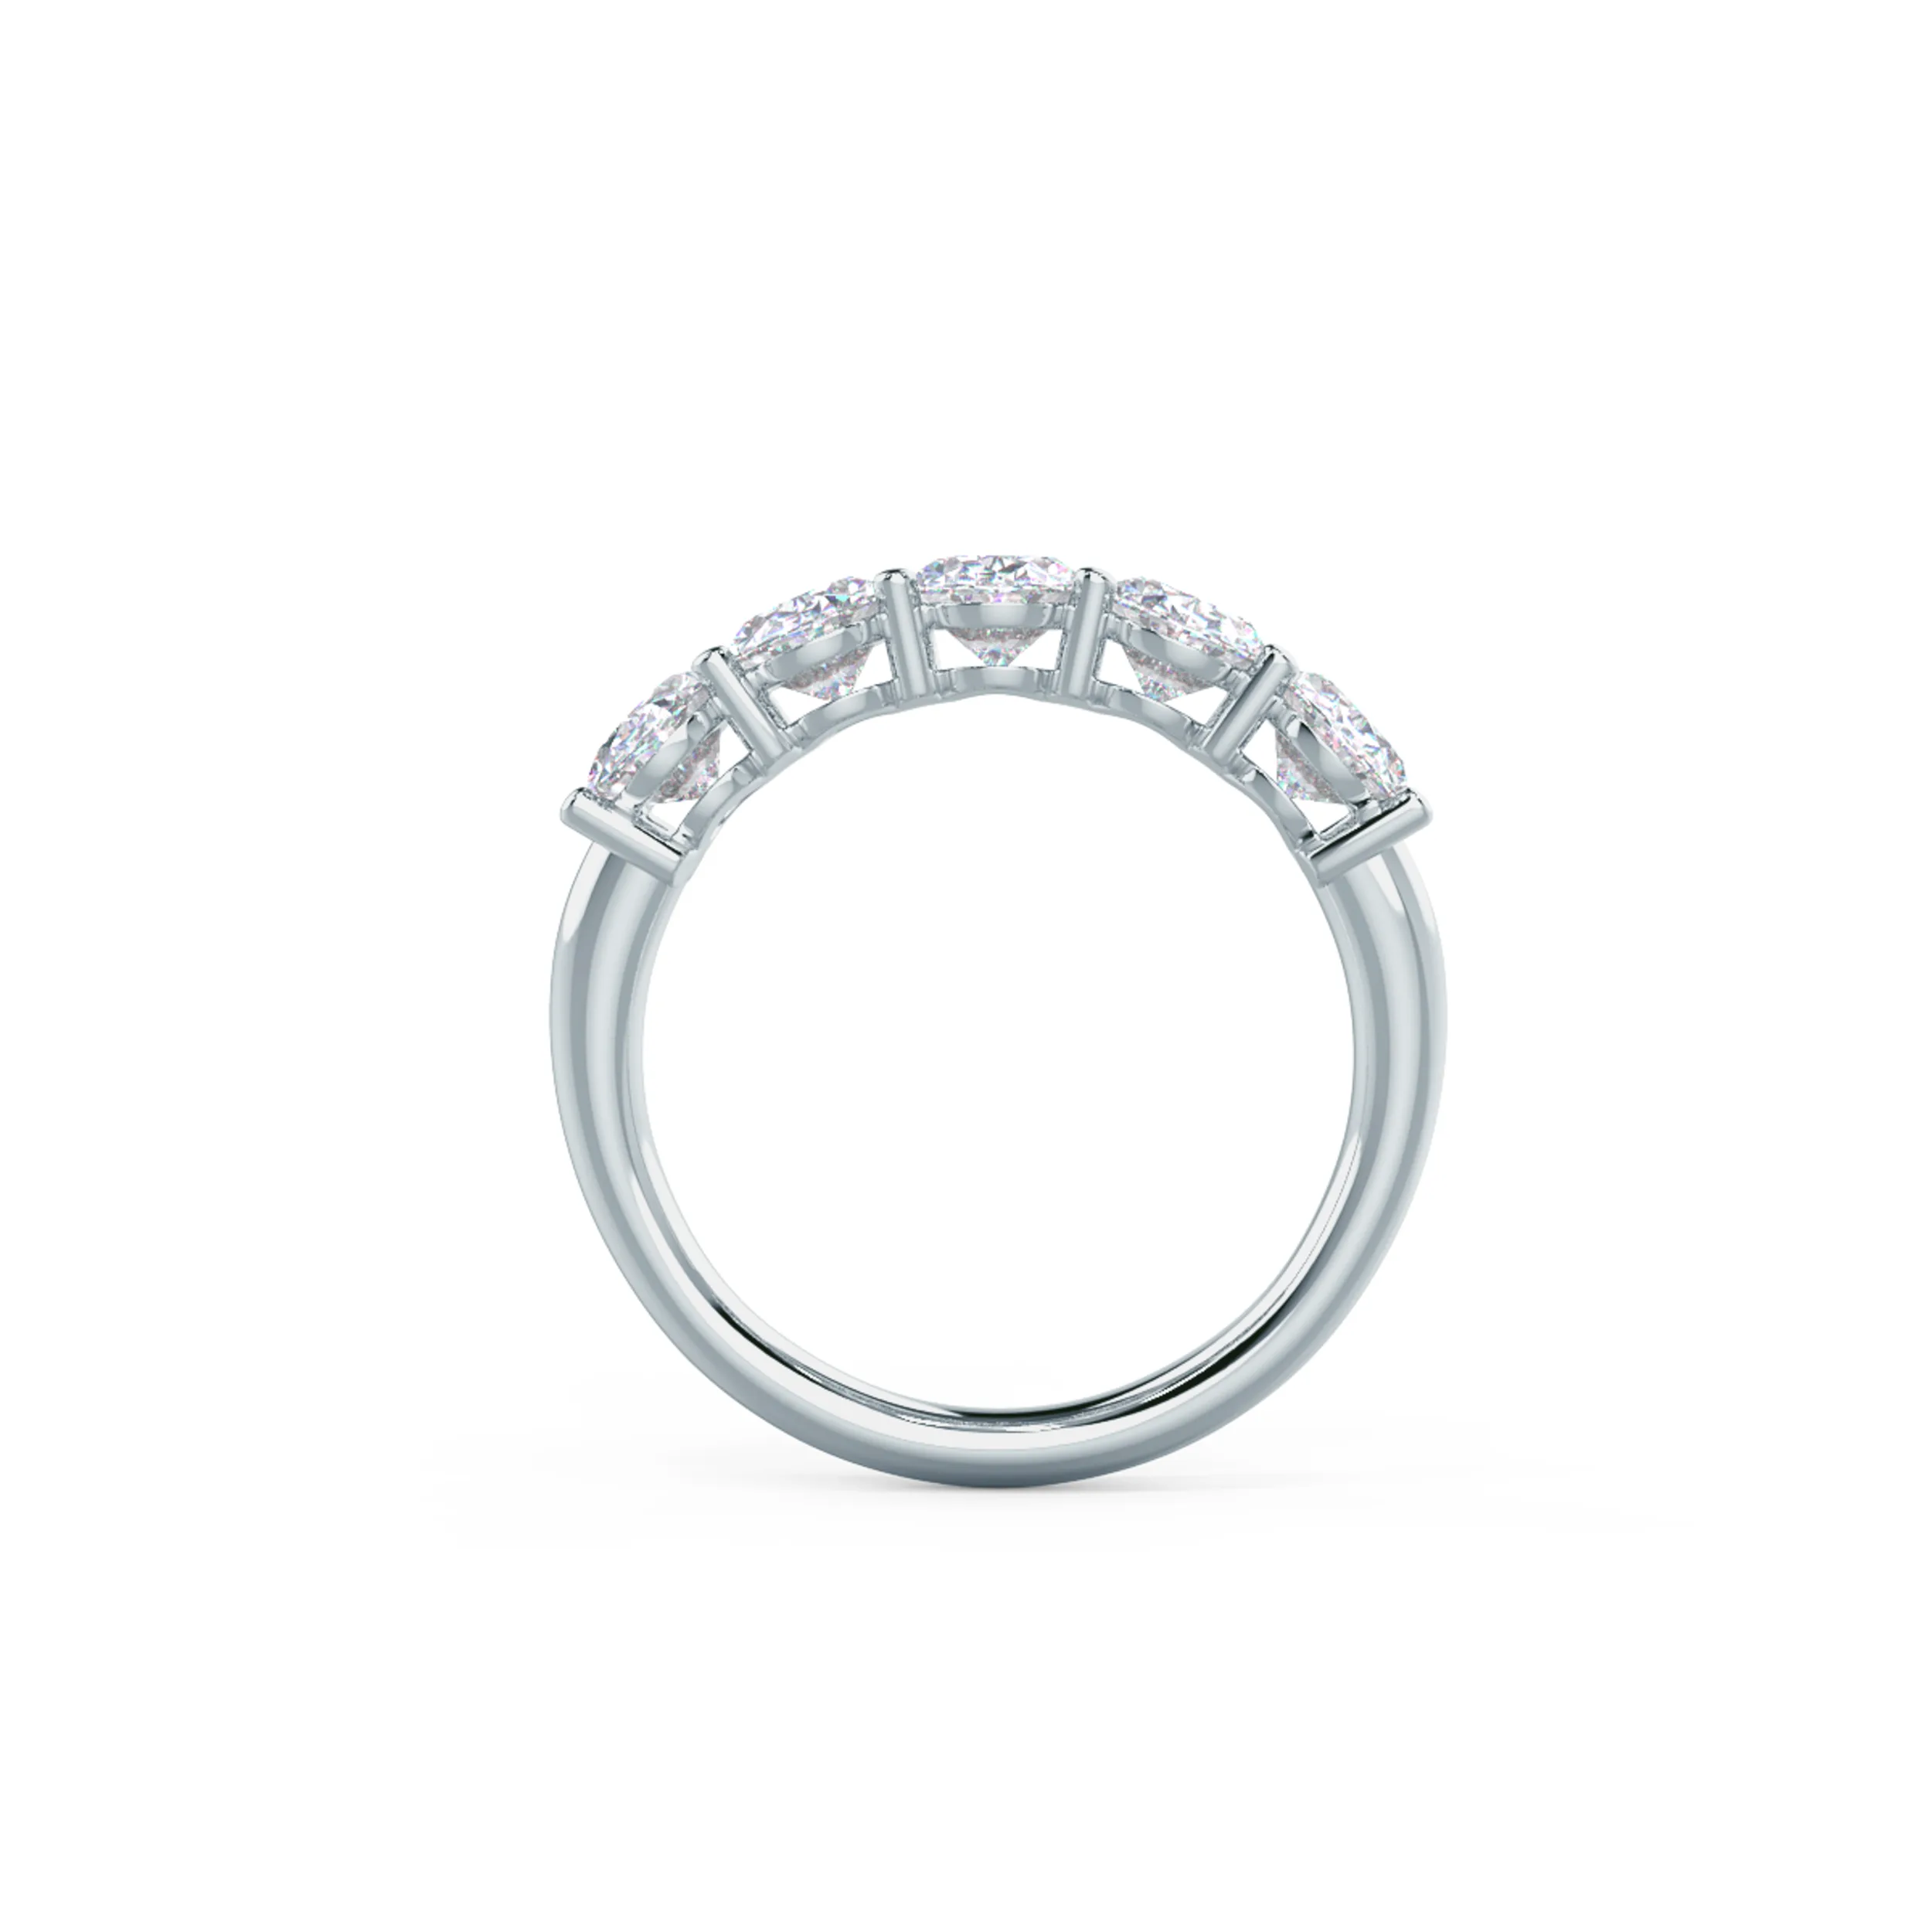 Hand Selected 2.5 Carat Lab Diamonds Oval Basket Five Stone in 18kt White Gold (Profile View)